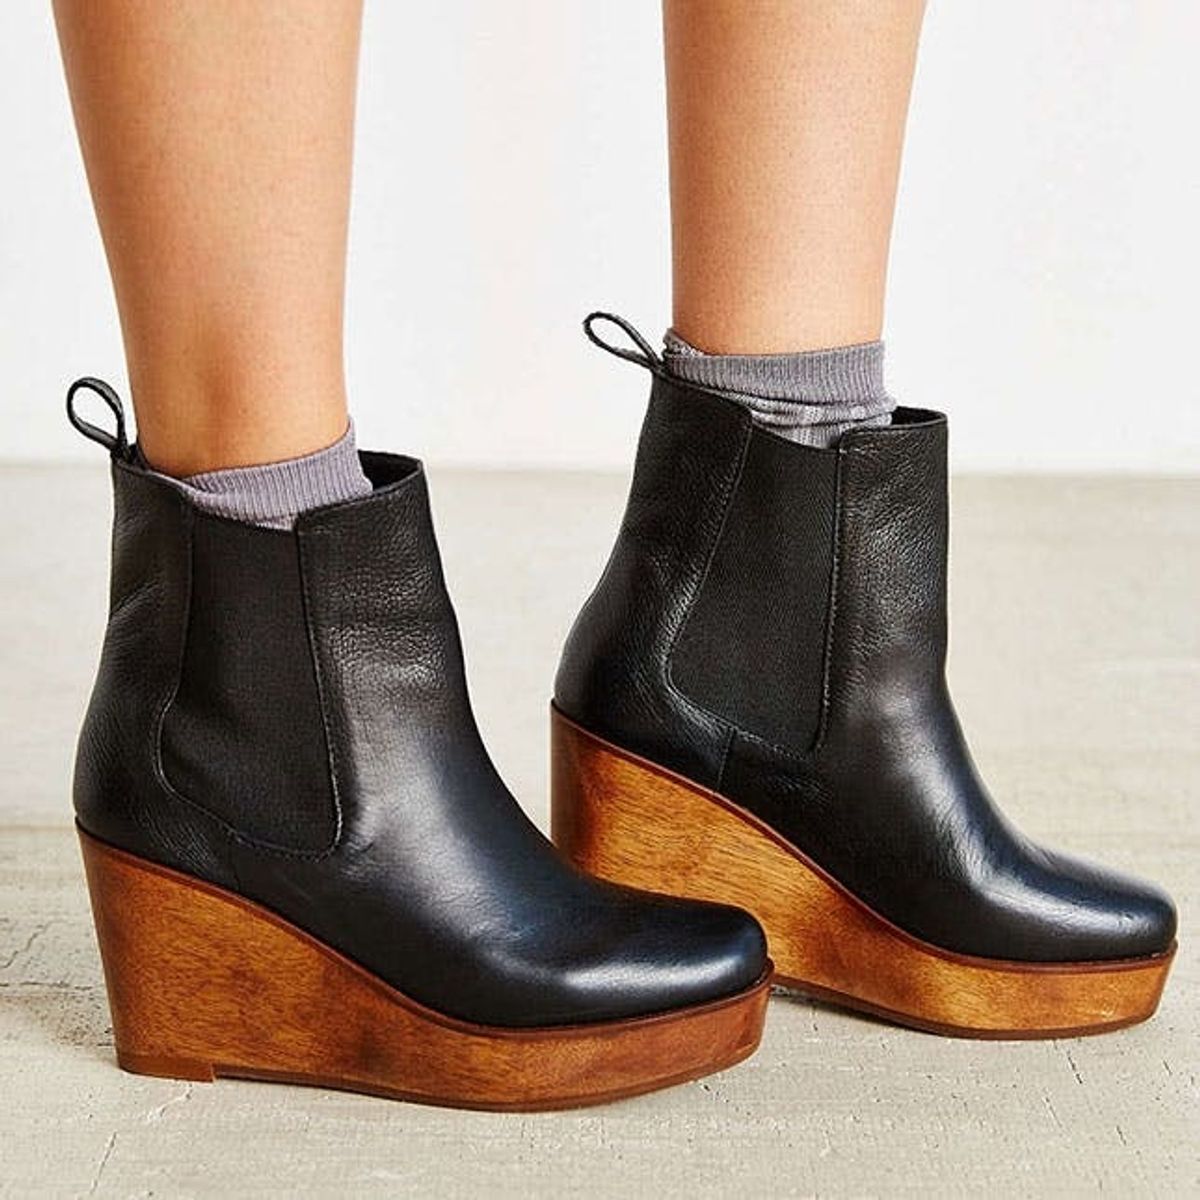 3 “Ugly” Shoes You’ll Love to Hate (but Actually Wear) This Fall